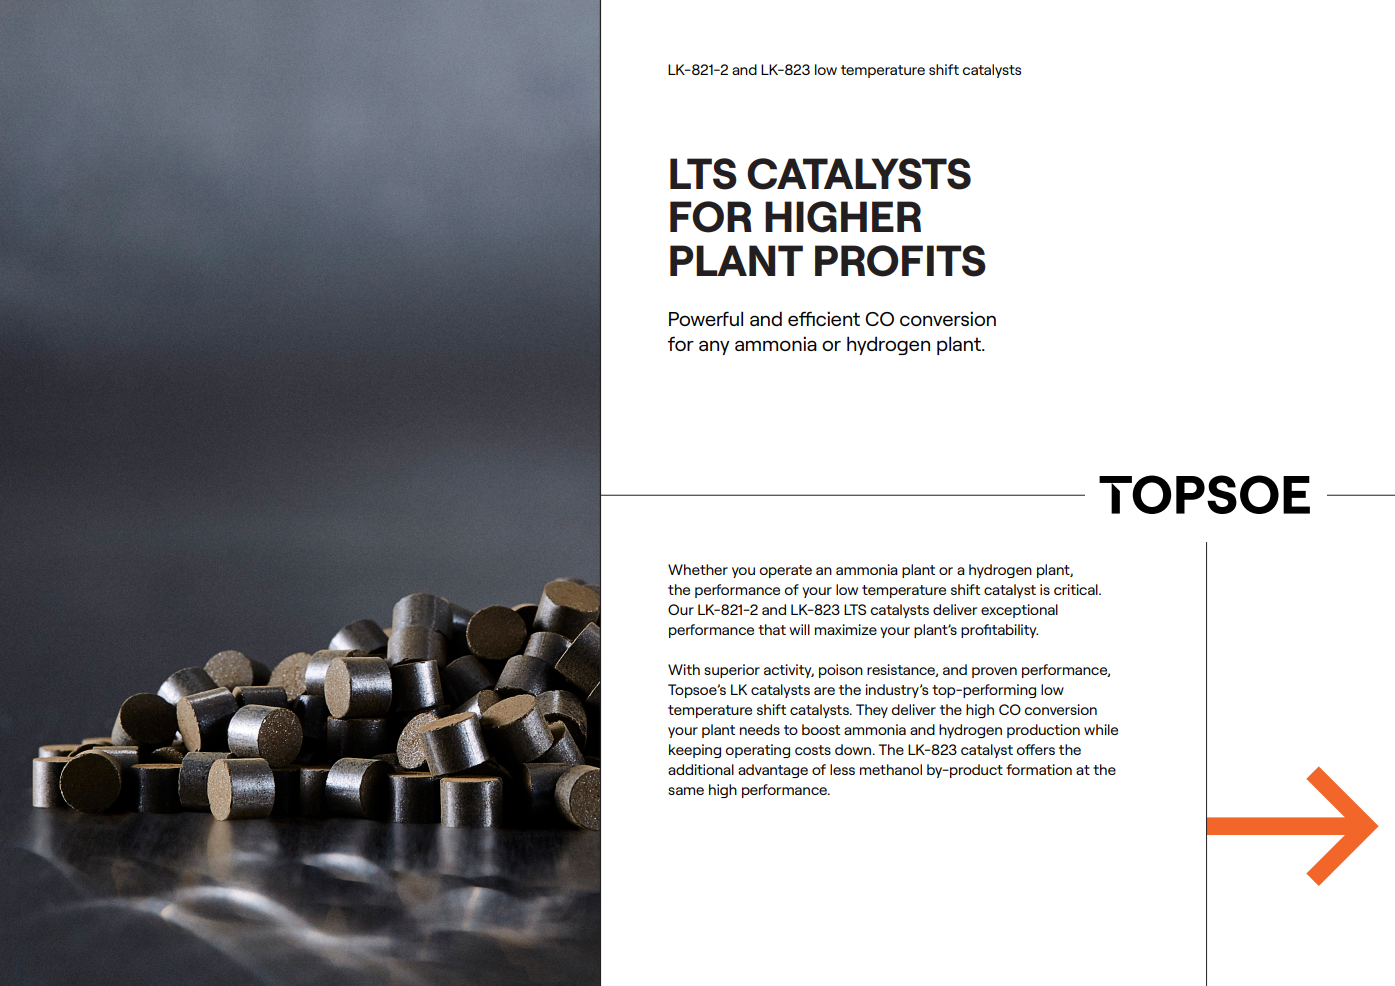 LTS catalysts for higher plant profits